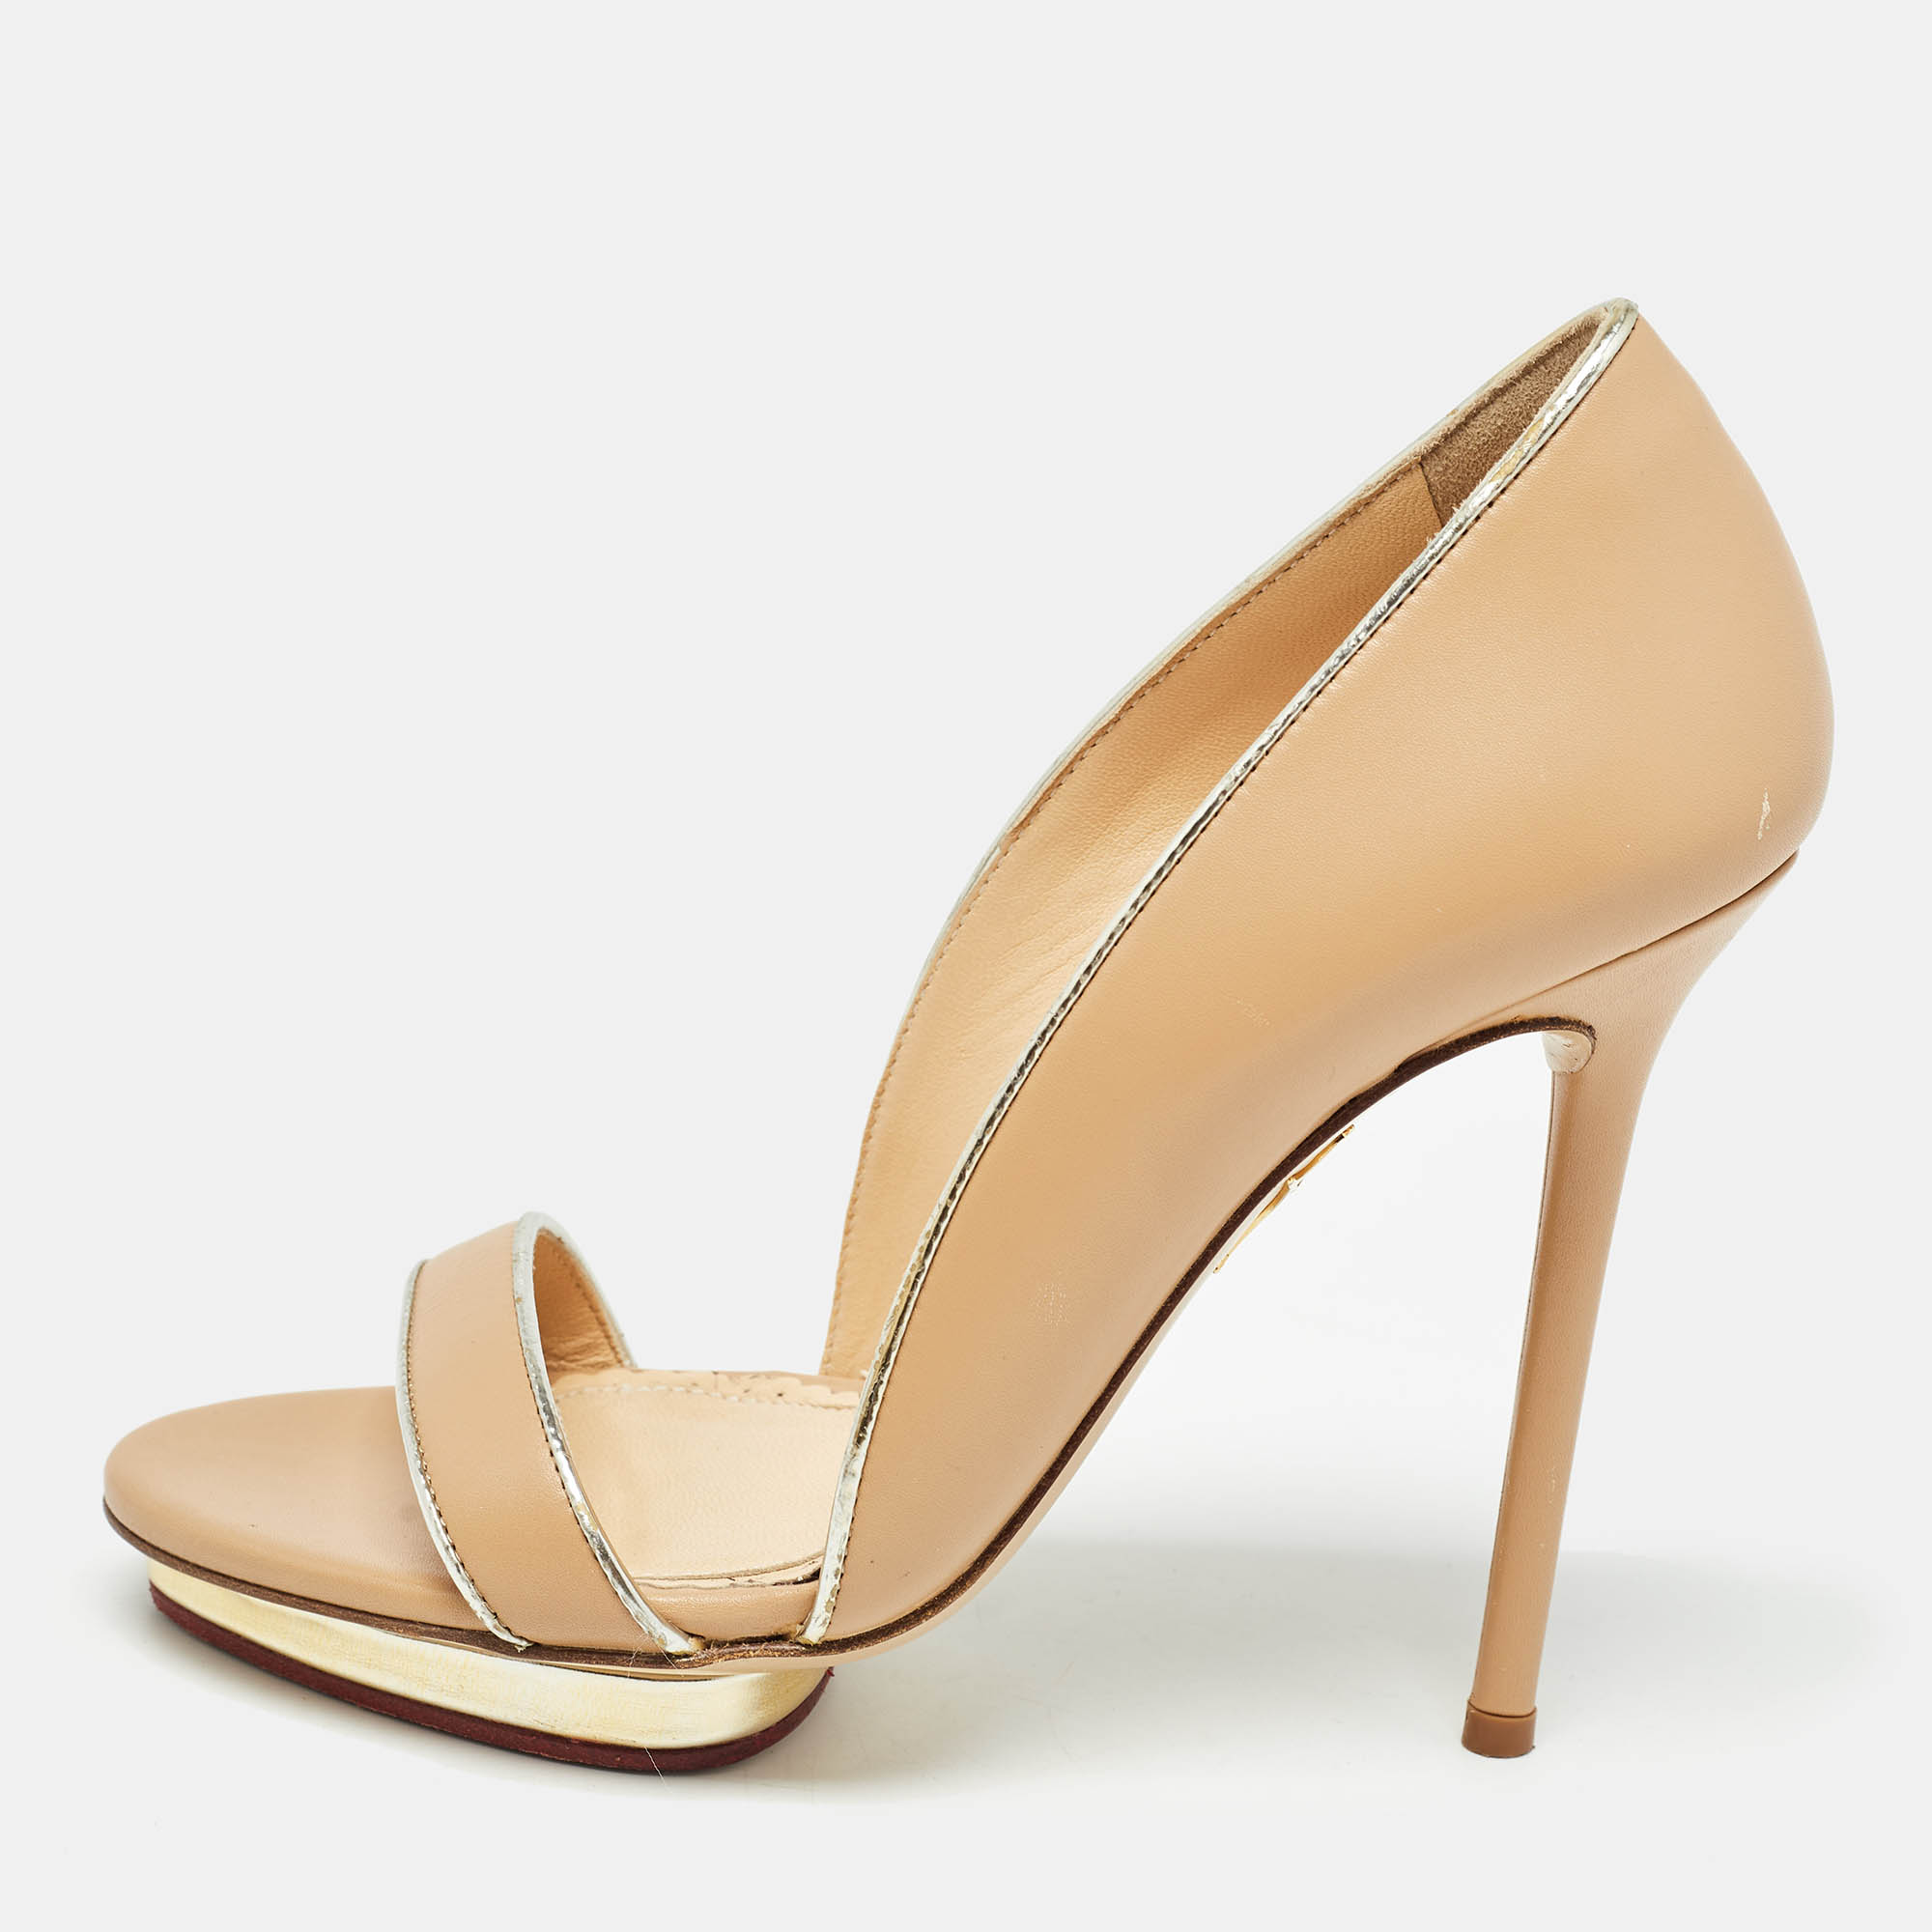 Charlotte olympia beige leather christine pumps size 36.5